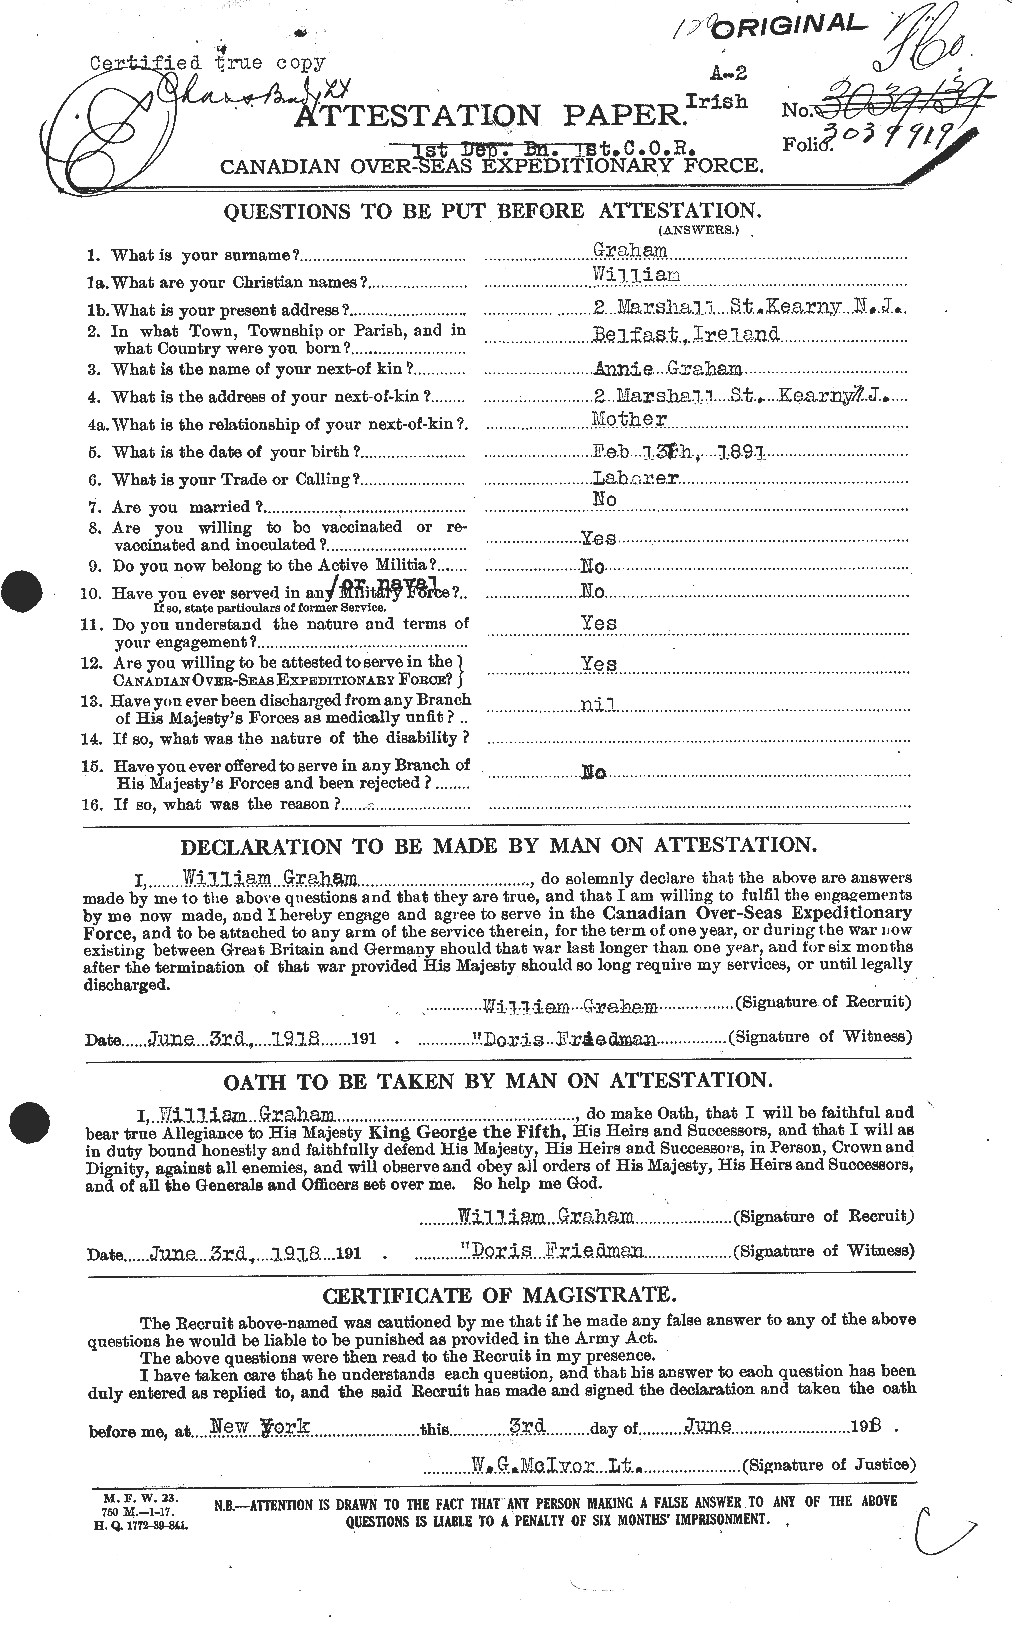 Personnel Records of the First World War - CEF 362692a